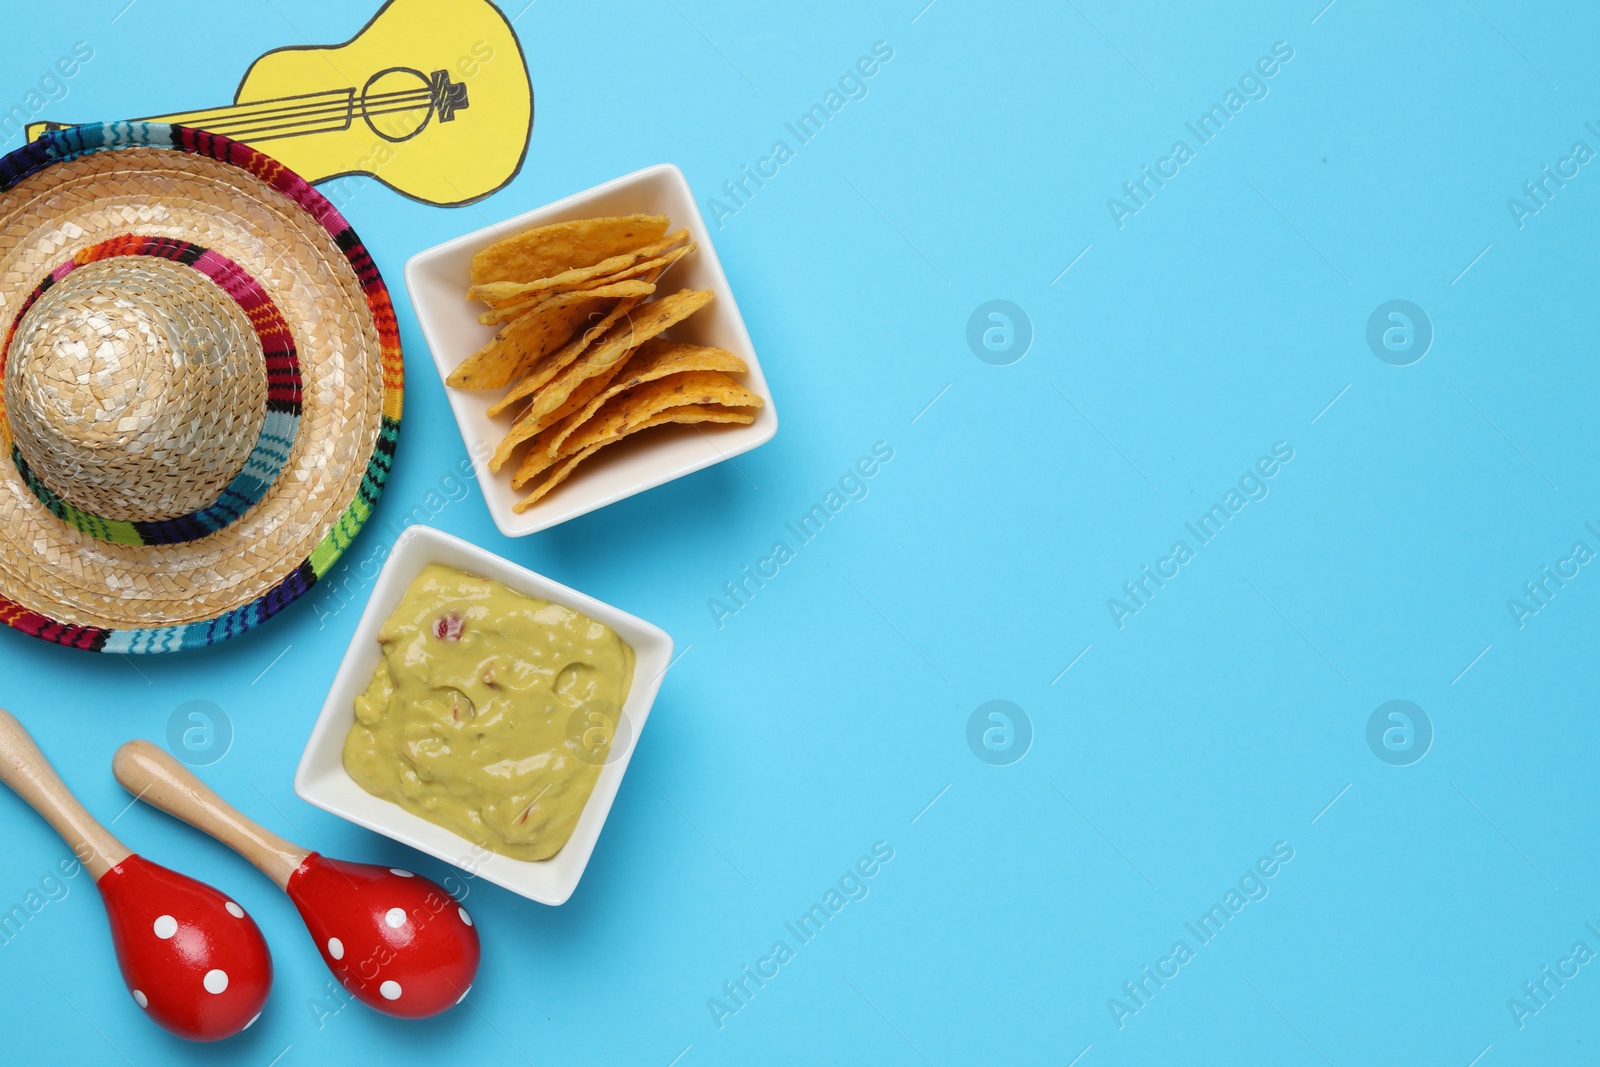 Photo of Mexican sombrero hat, guacamole, nachos chips, maracas and paper guitar on light blue background, flat lay. Space for text